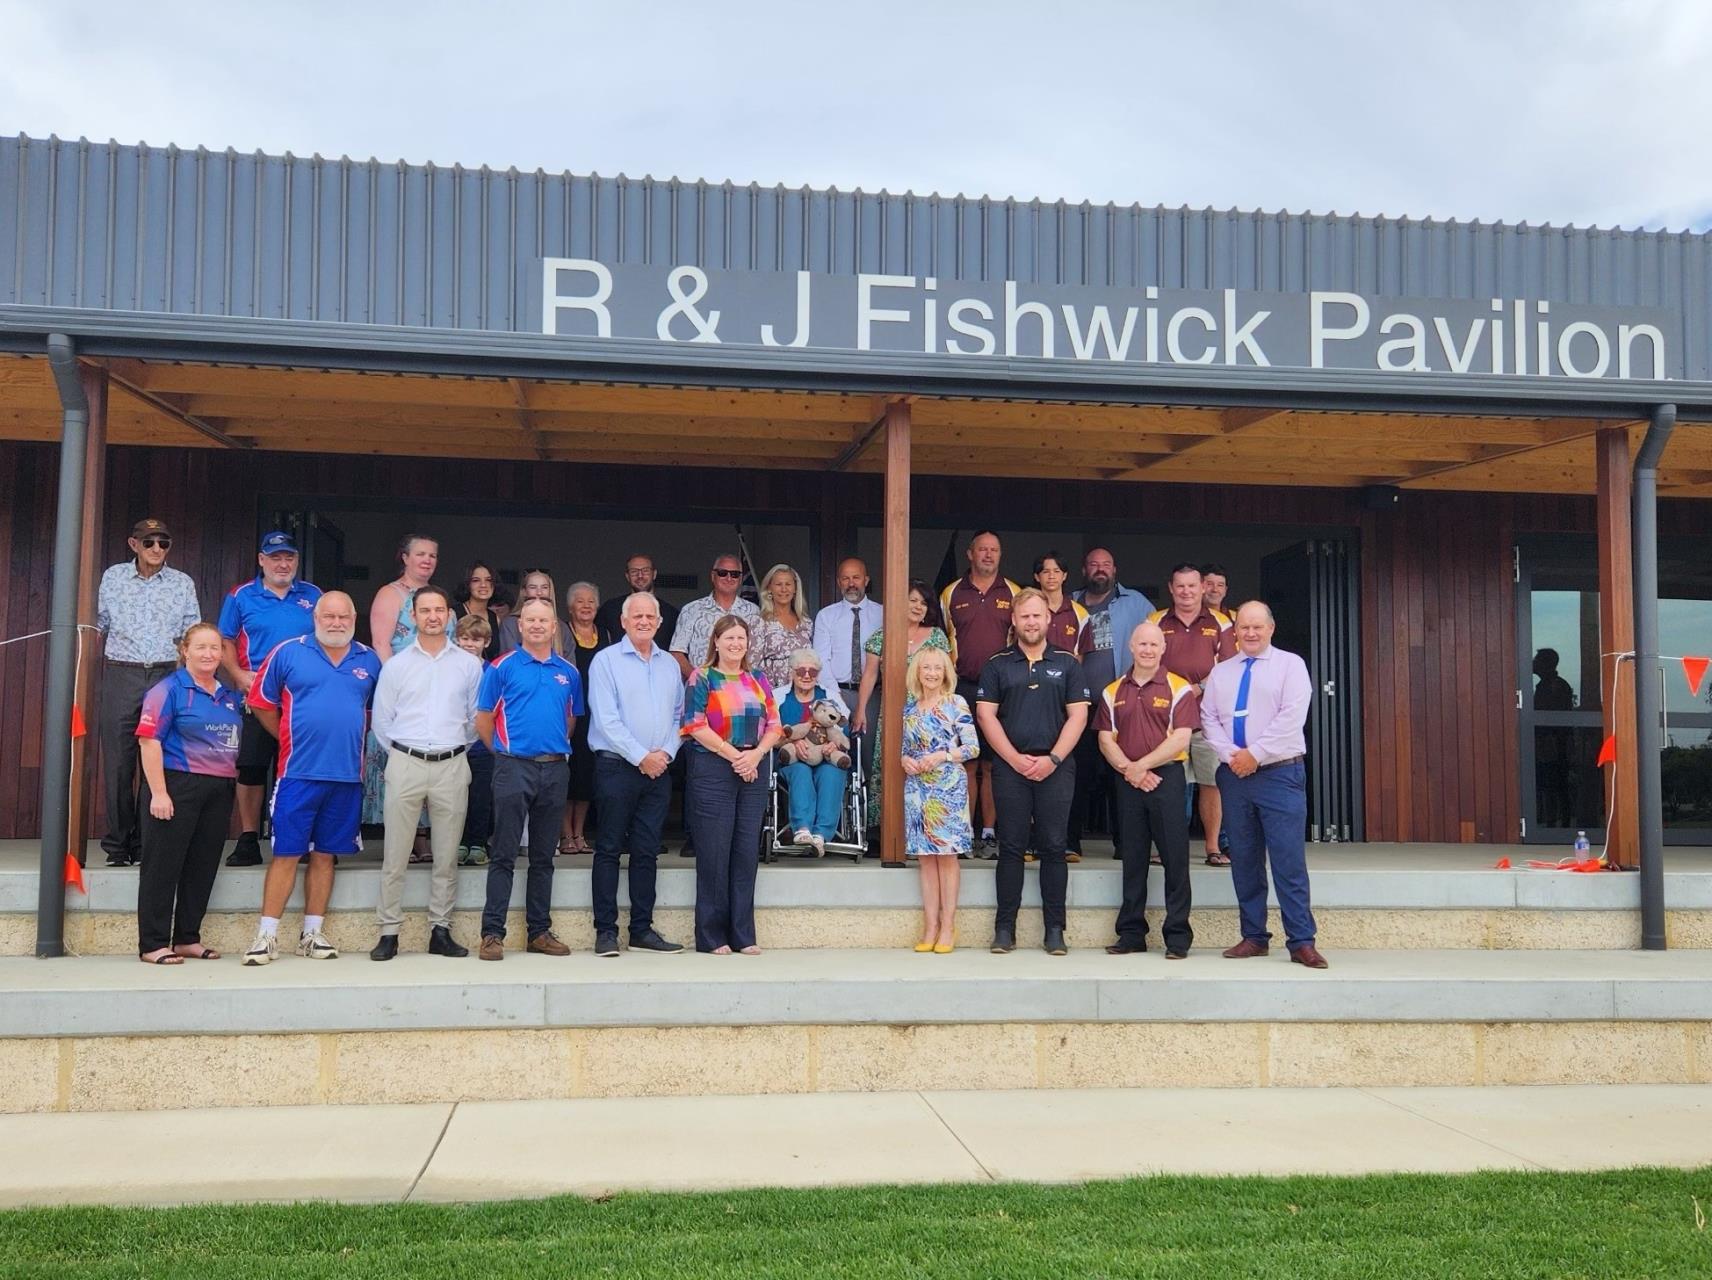 The new $2.1 million R & J Fishwick Pavilion was officially opened today.